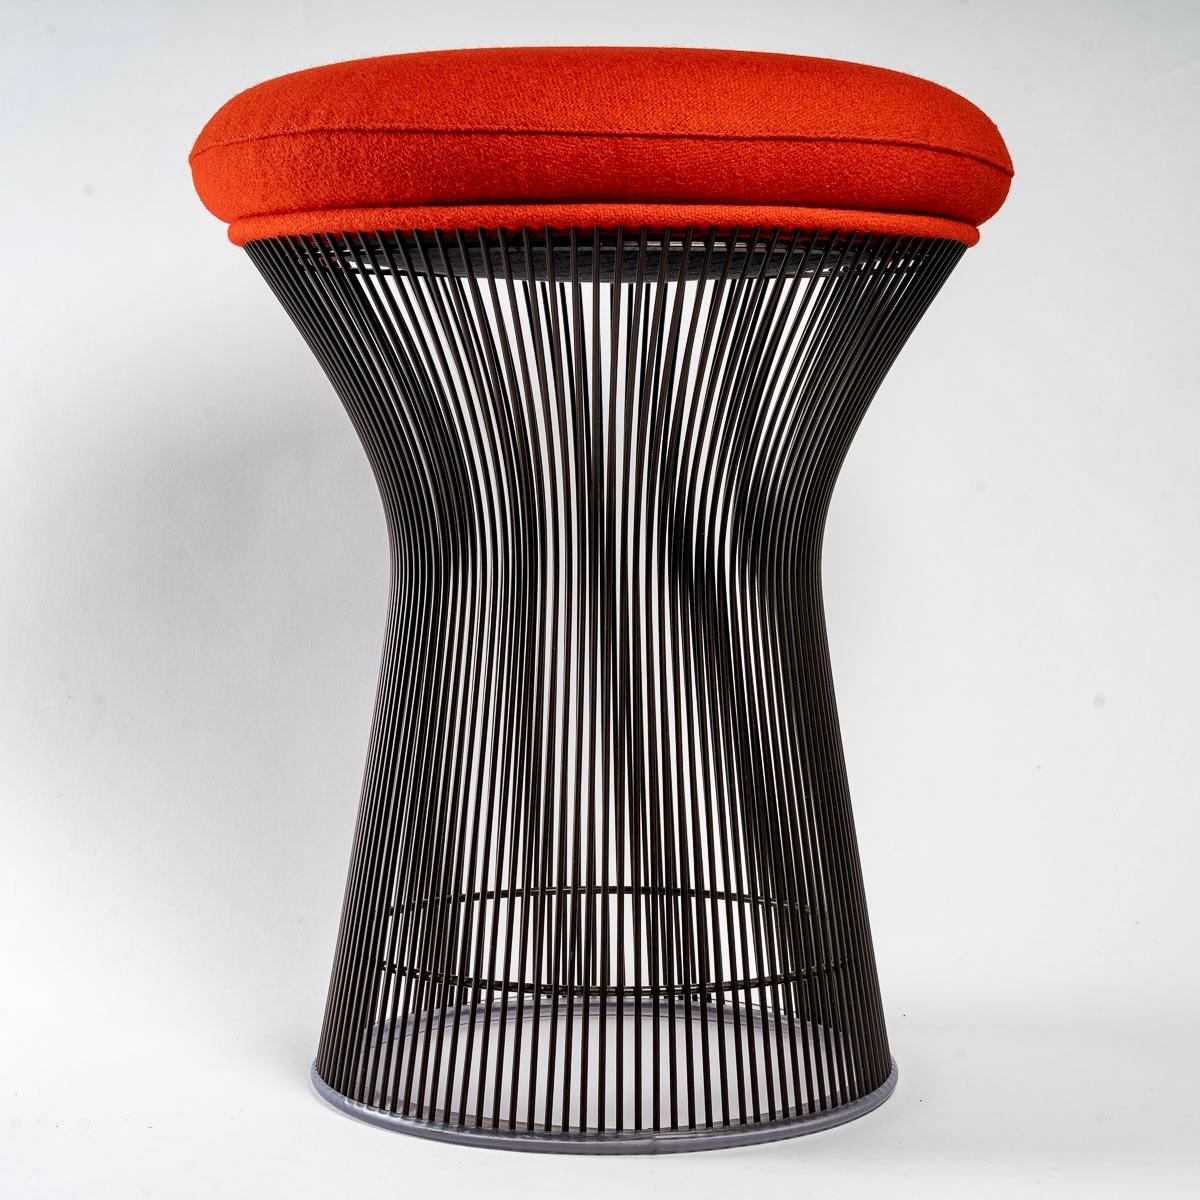 Authentic stool, designed by Warren Platner in 1966.
Recent Knoll edition in red Kvadrat Tonus fabrics and bronze metal structure.
Knoll ''K'' fabrics under the seat.

New condition.

H. 54.5cm x D. 44cm

Model still available on order from